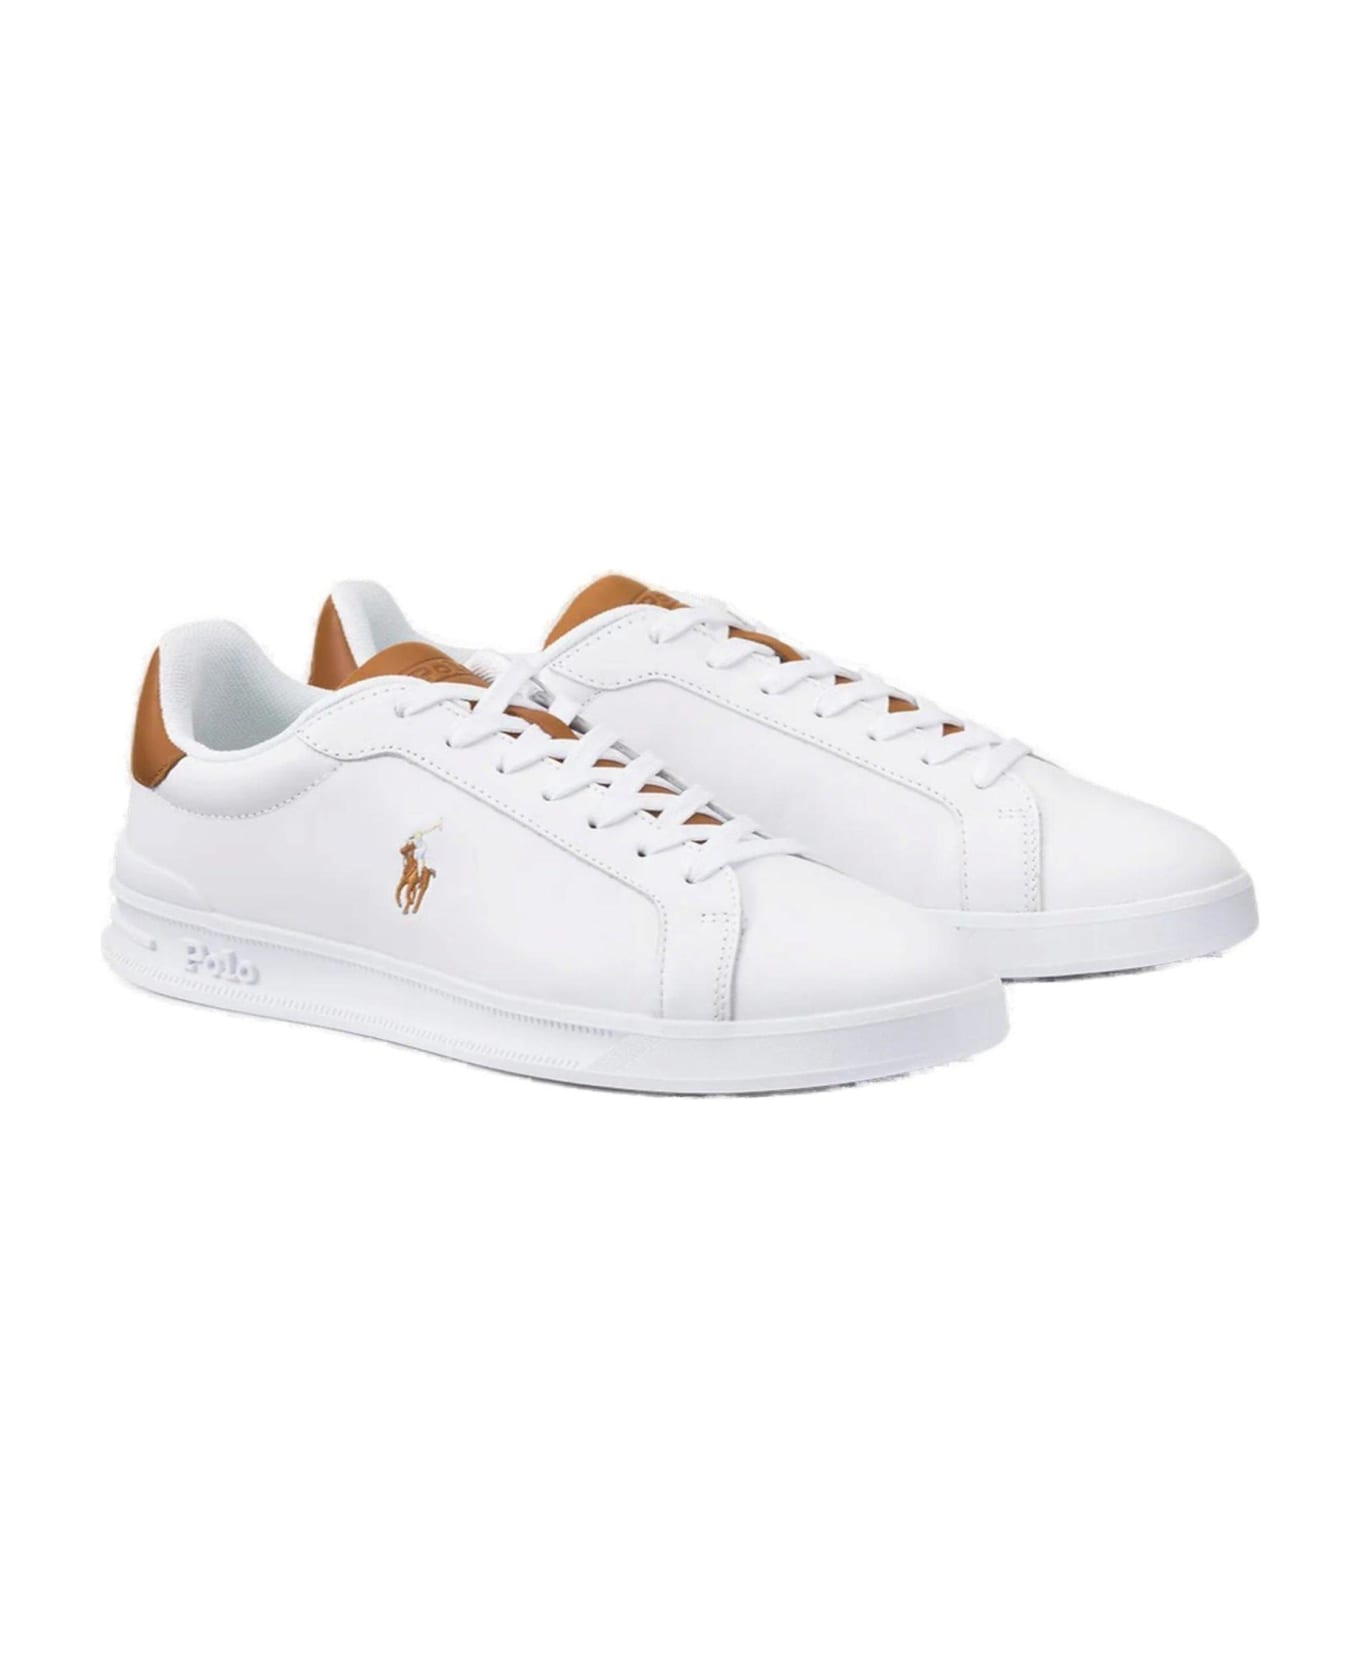 Polo Ralph Lauren Logo Embroidered Low-top Sneakers - White スニーカー